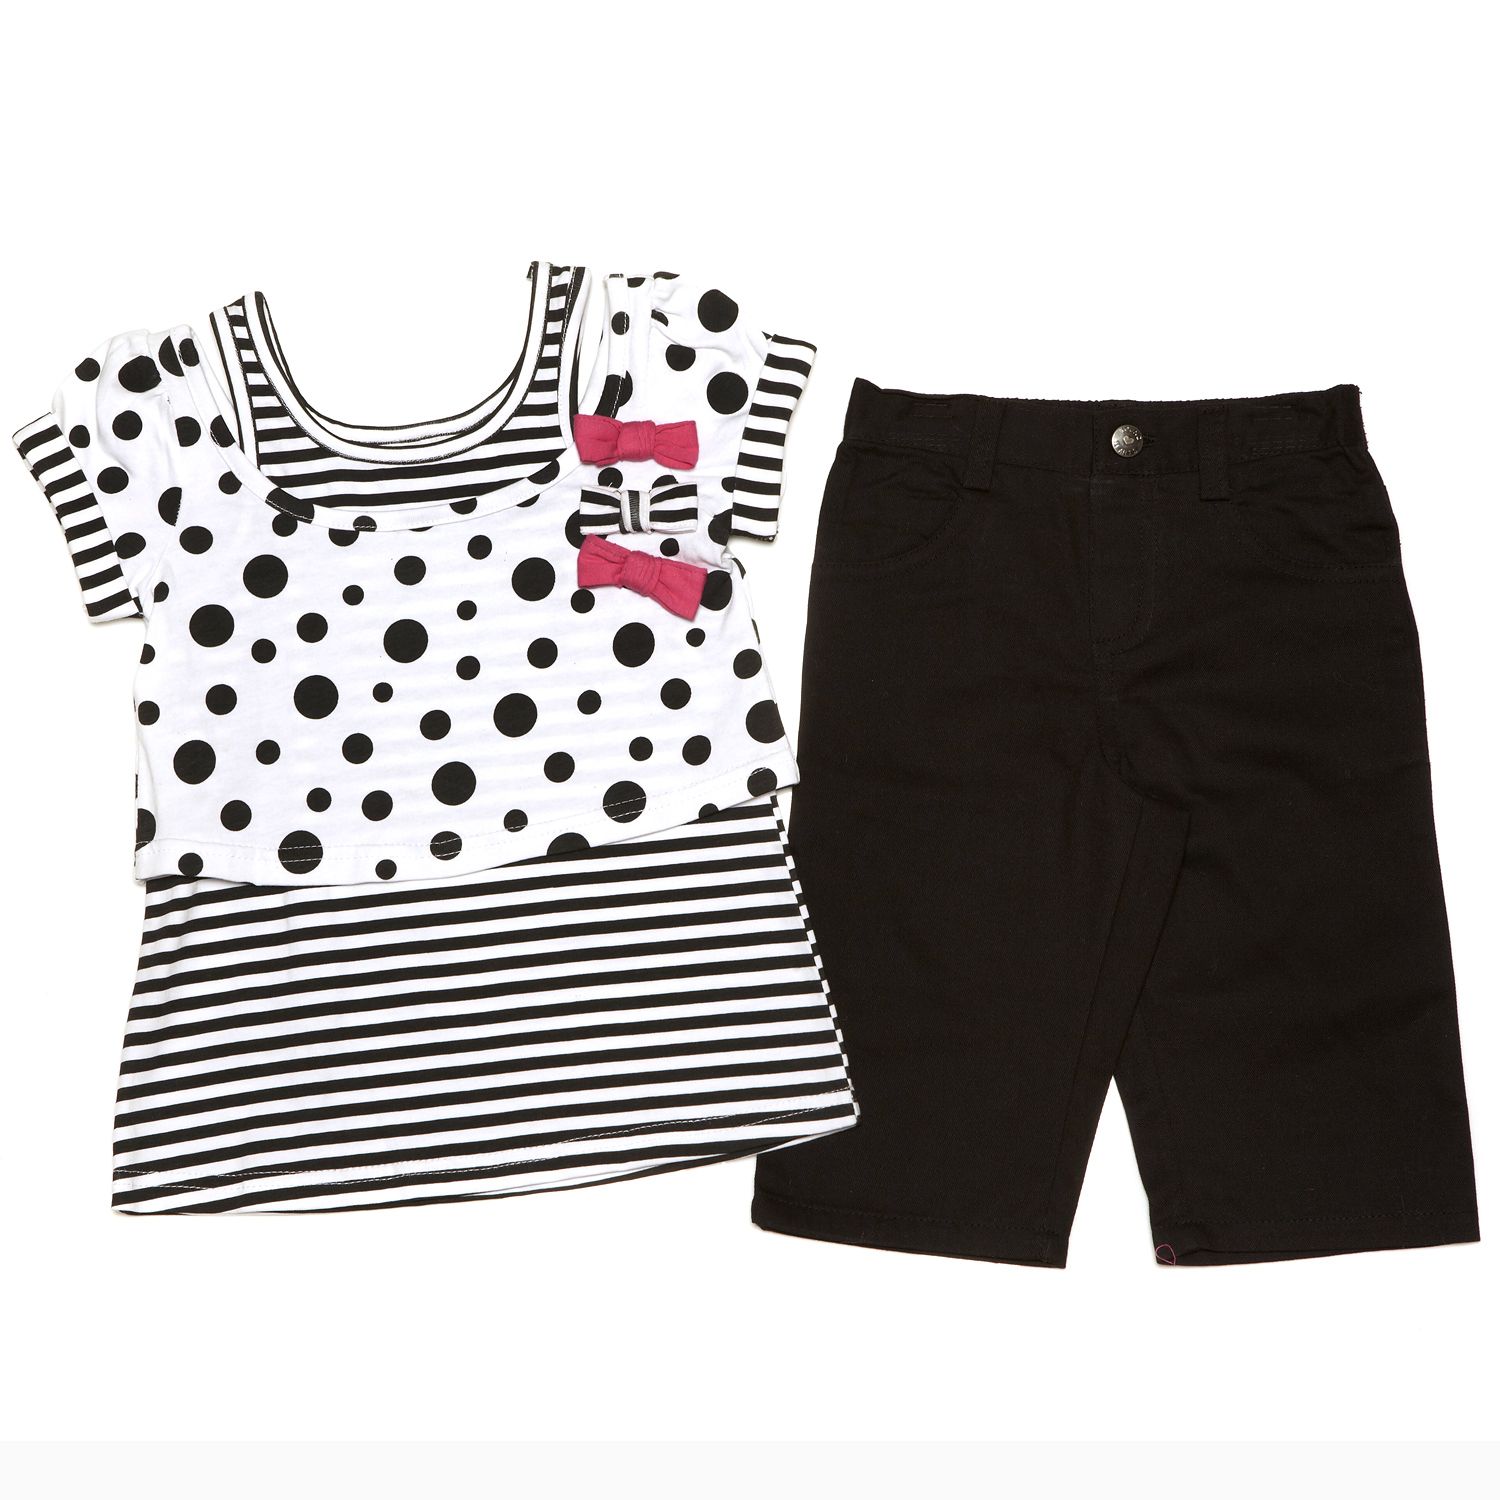 Young Hearts Girls Knit Tank With Top and Pants Set Black/White